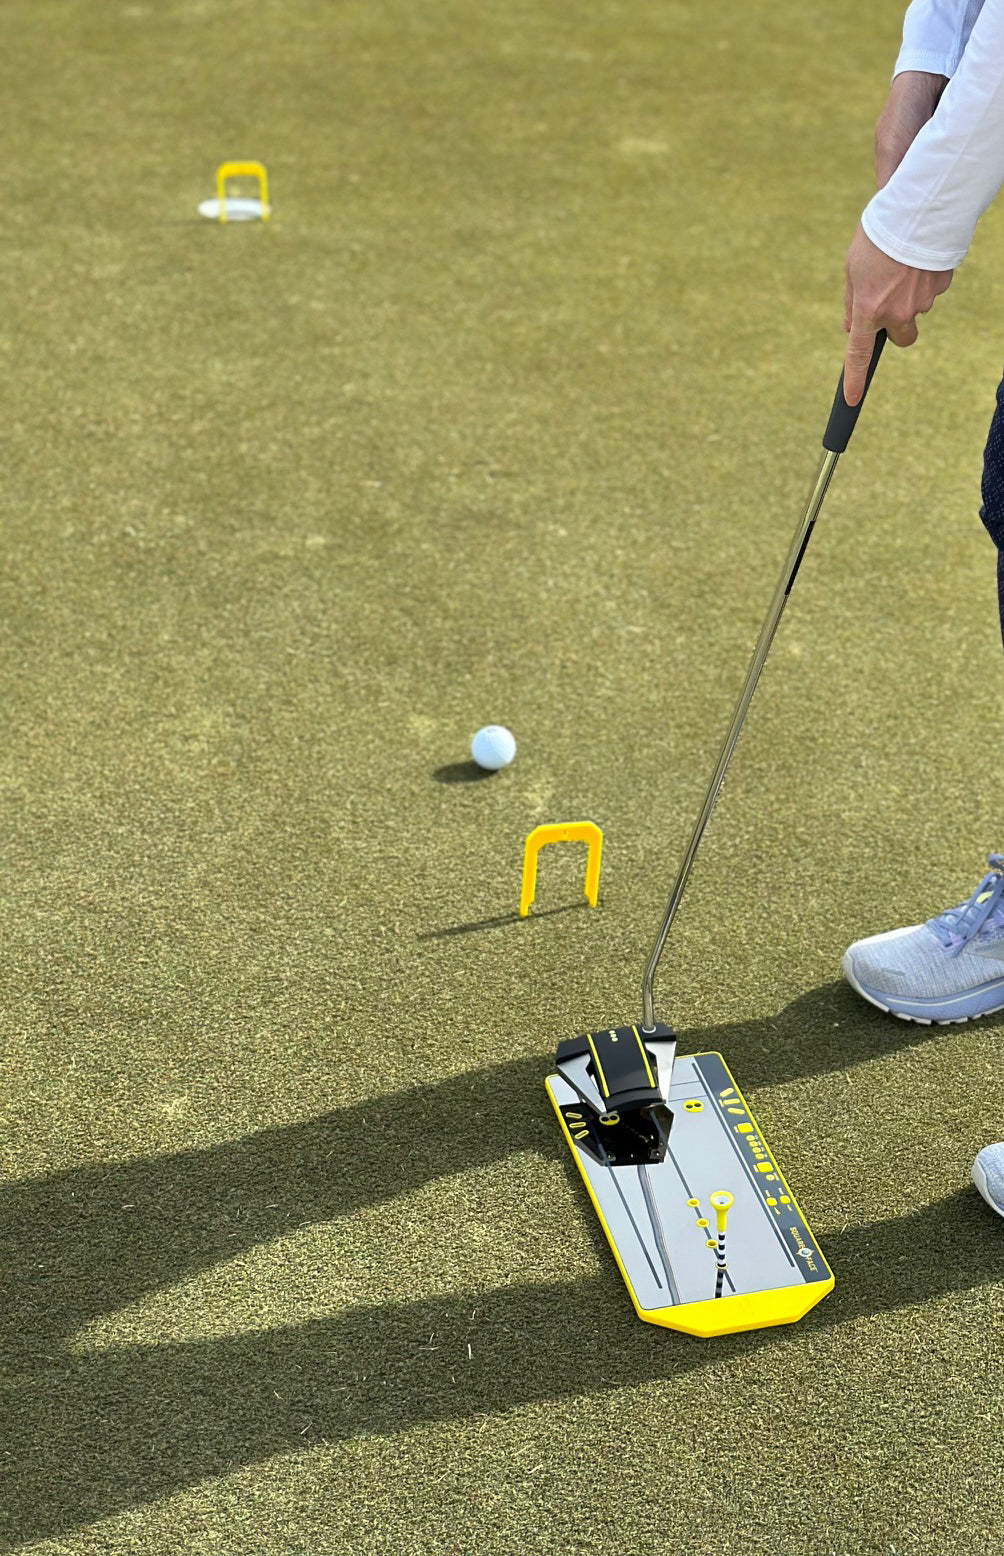 Square Face the Electronic Putting Mirror, The tool that can help you putt better and pick out your next putter!